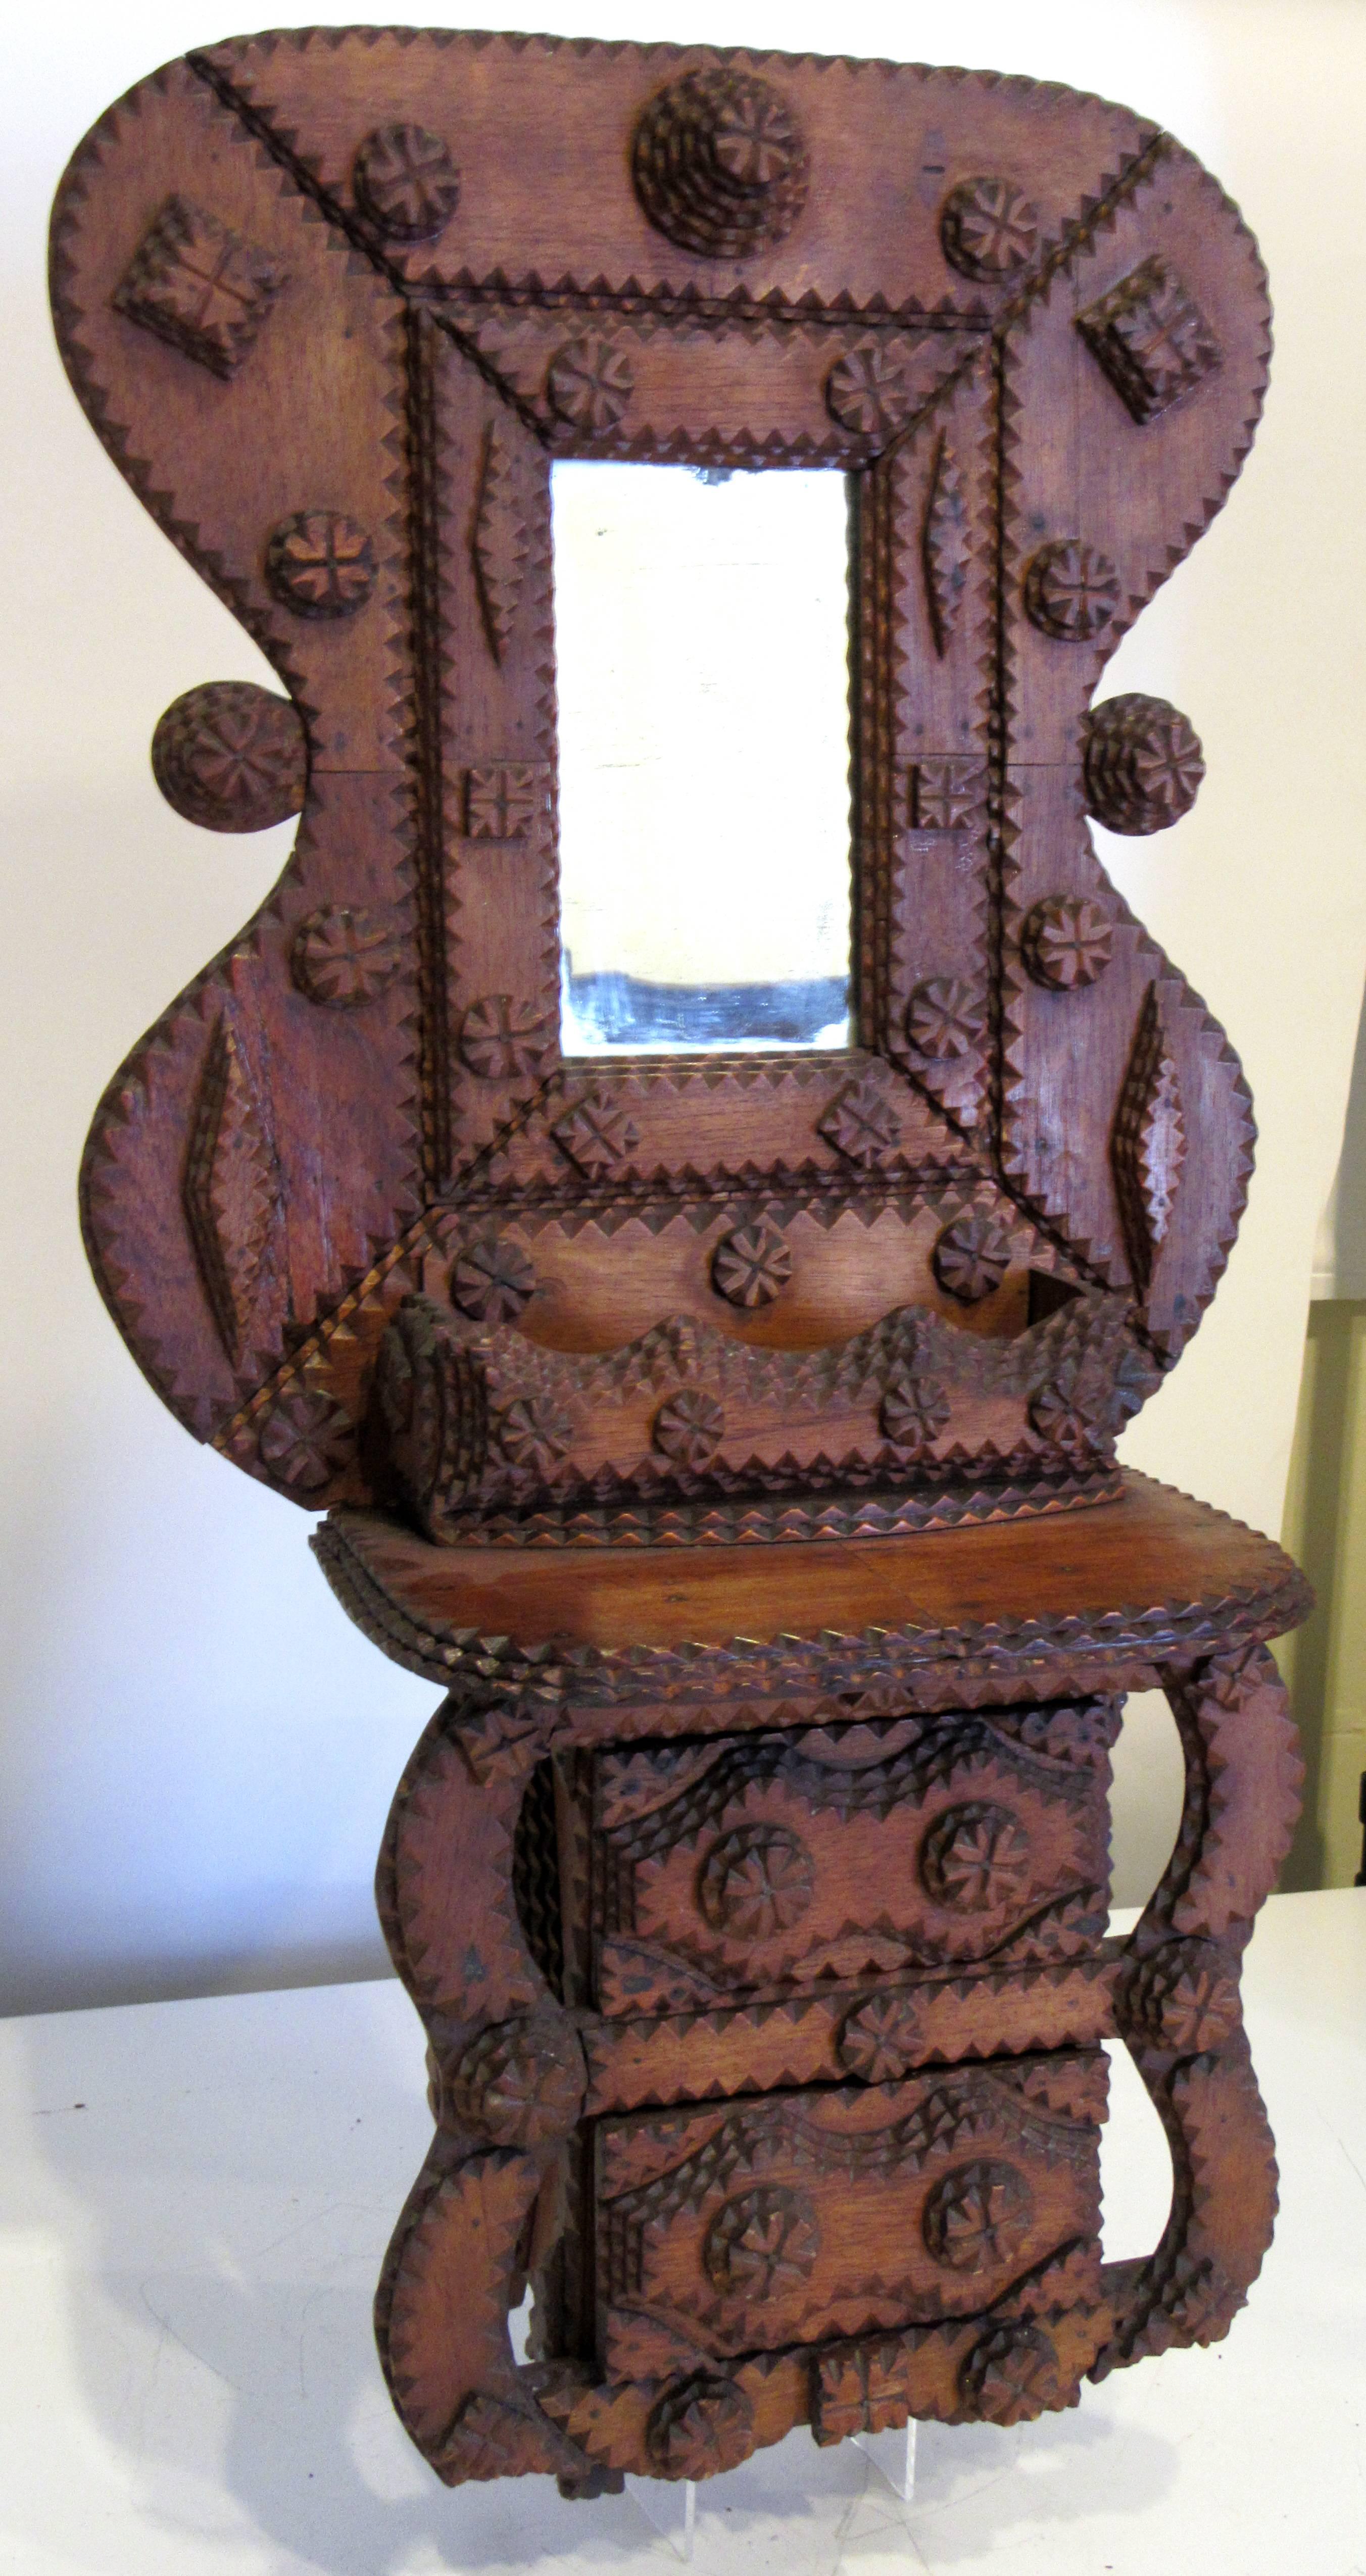 A very unique design jewelry or dressing table hand-carved from wood boxes and crates.